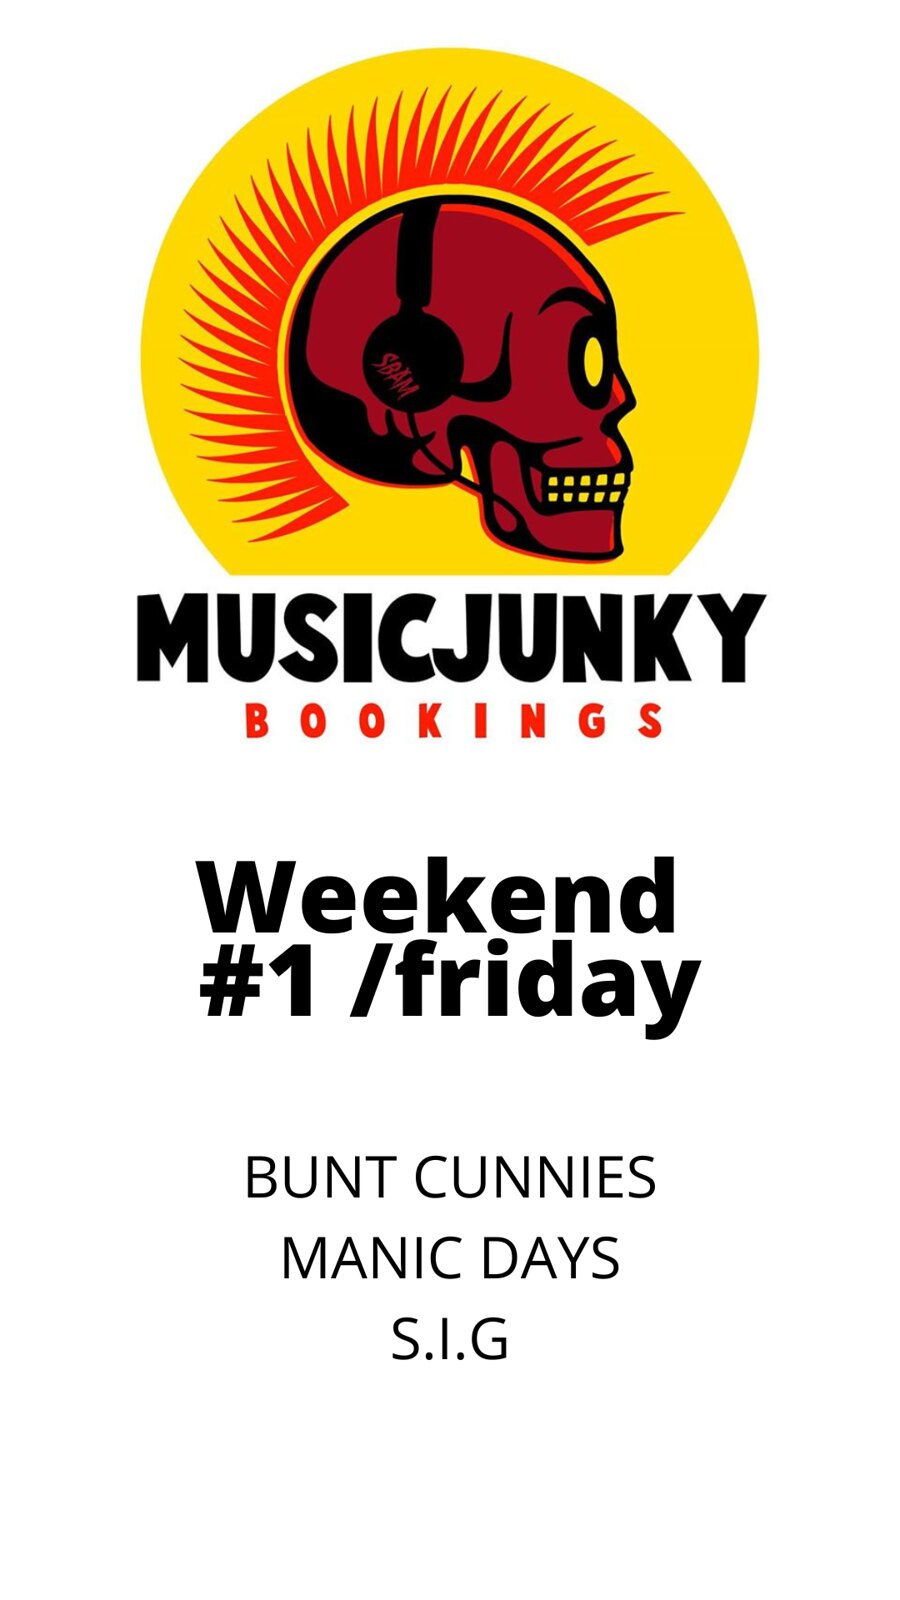 4th Anniversary of MUSICJUNKY BOOKINGS & RECORDS with BUNT CUNNIES / MANIC DAYS / S.I.G